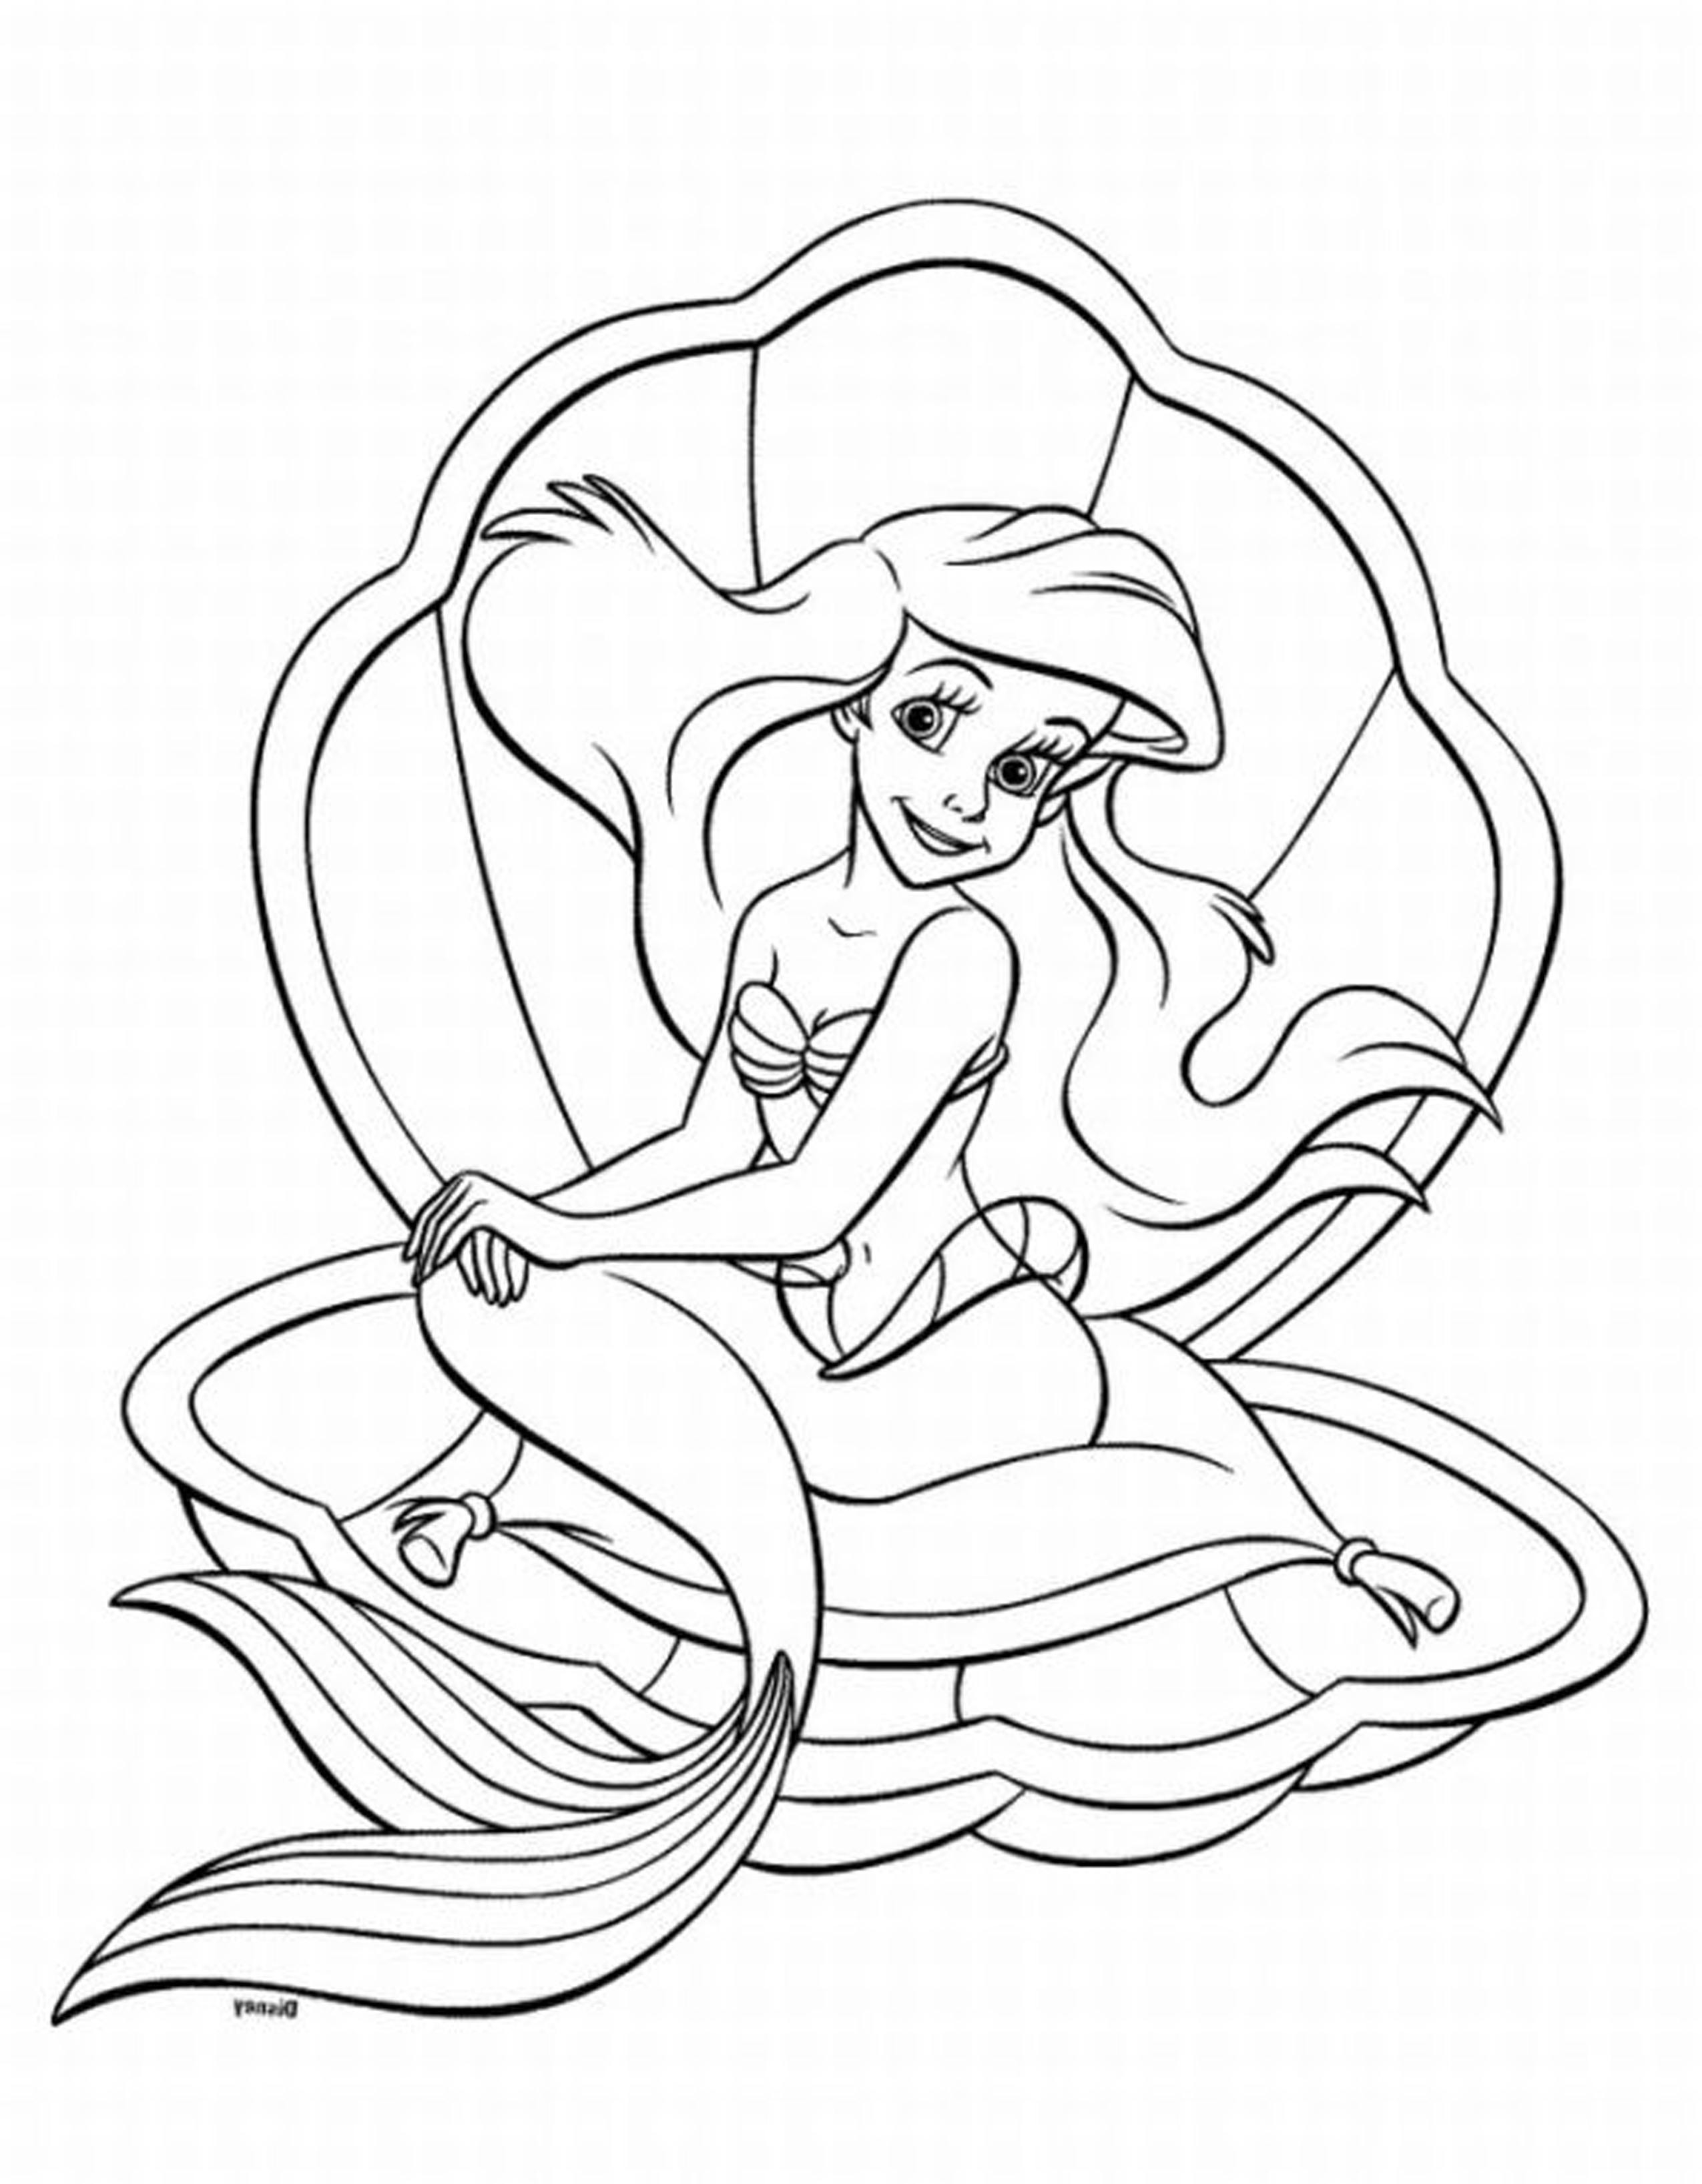 Ariel Printable Coloring Pages Coloring Pages Disney Ariel Coloring Pages For Kids With Page Free